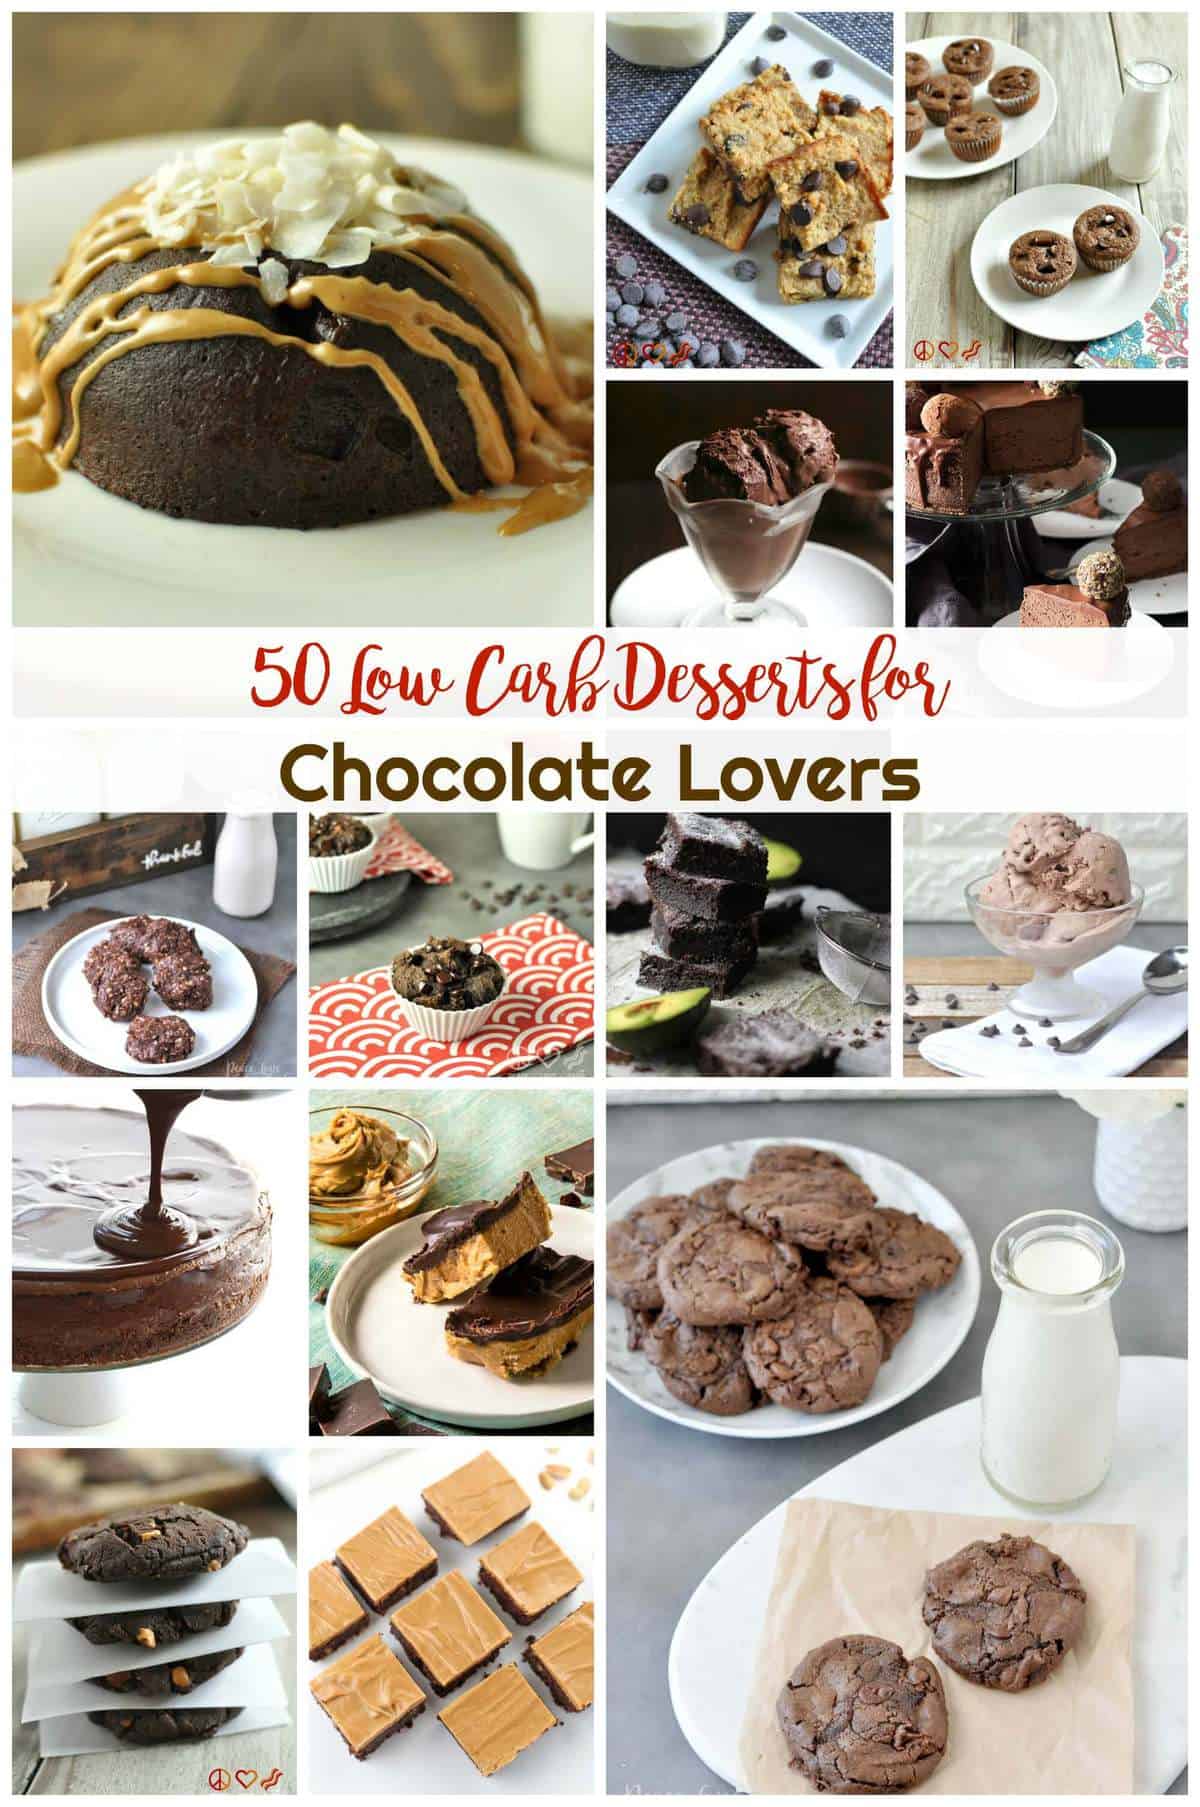 50 Low Carb Desserts for Chocolate Lovers | Healthy Living in Body and Mind